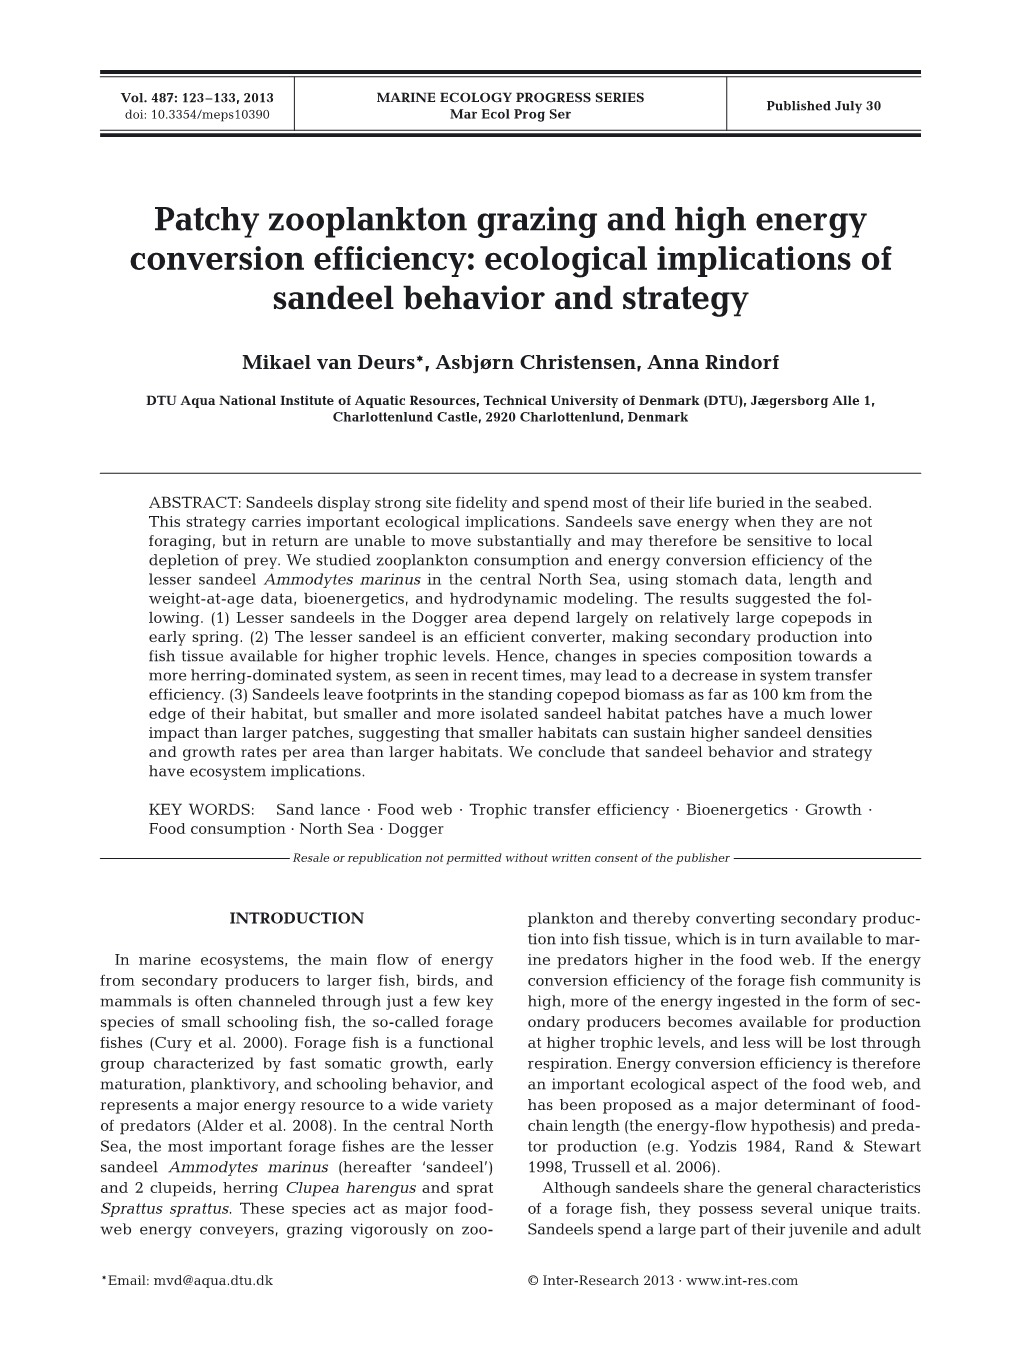 Patchy Zooplankton Grazing and High Energy Conversion Efficiency: Ecological Implications of Sandeel Behavior and Strategy